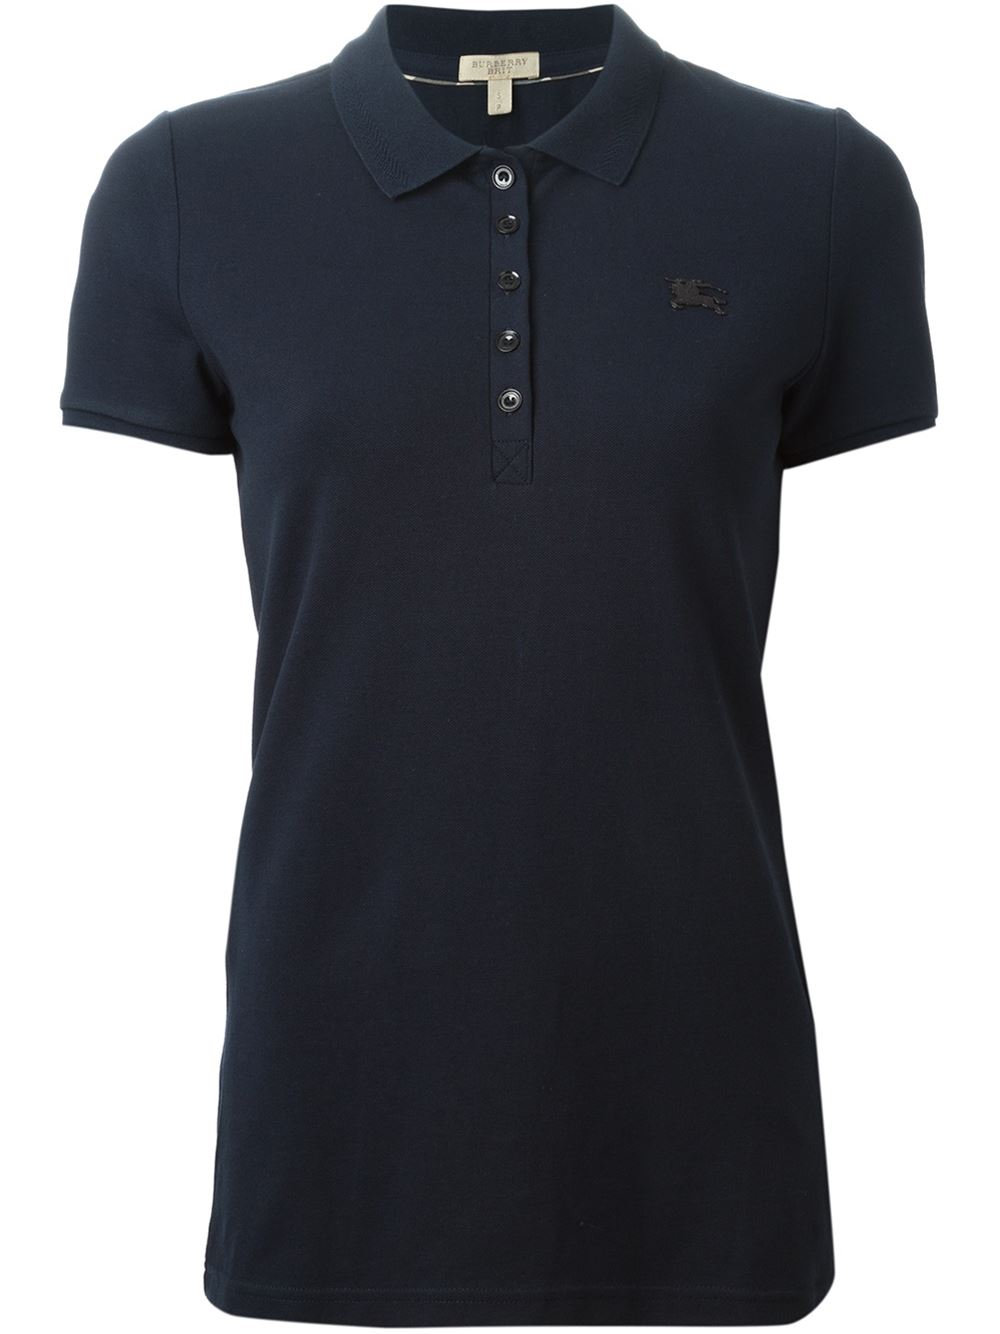 Lyst - Burberry Brit Classic Polo Shirt in Blue